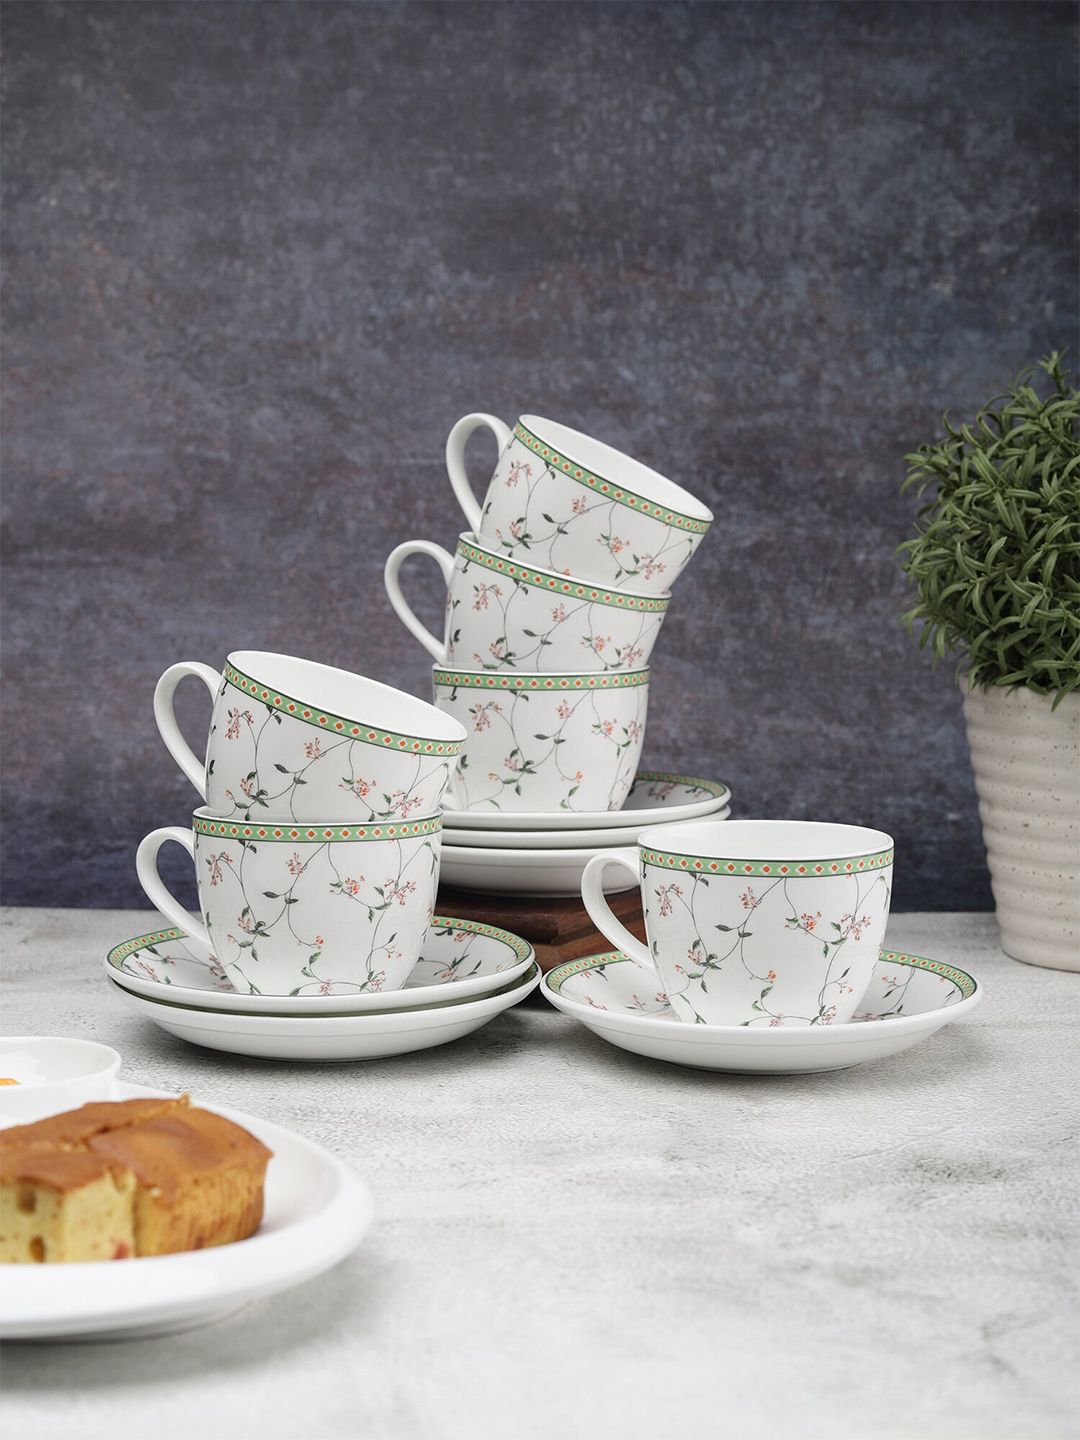 JCPL White & Green Set of 6 Floral Printed Ceramic Glossy Cups and Saucers Price in India